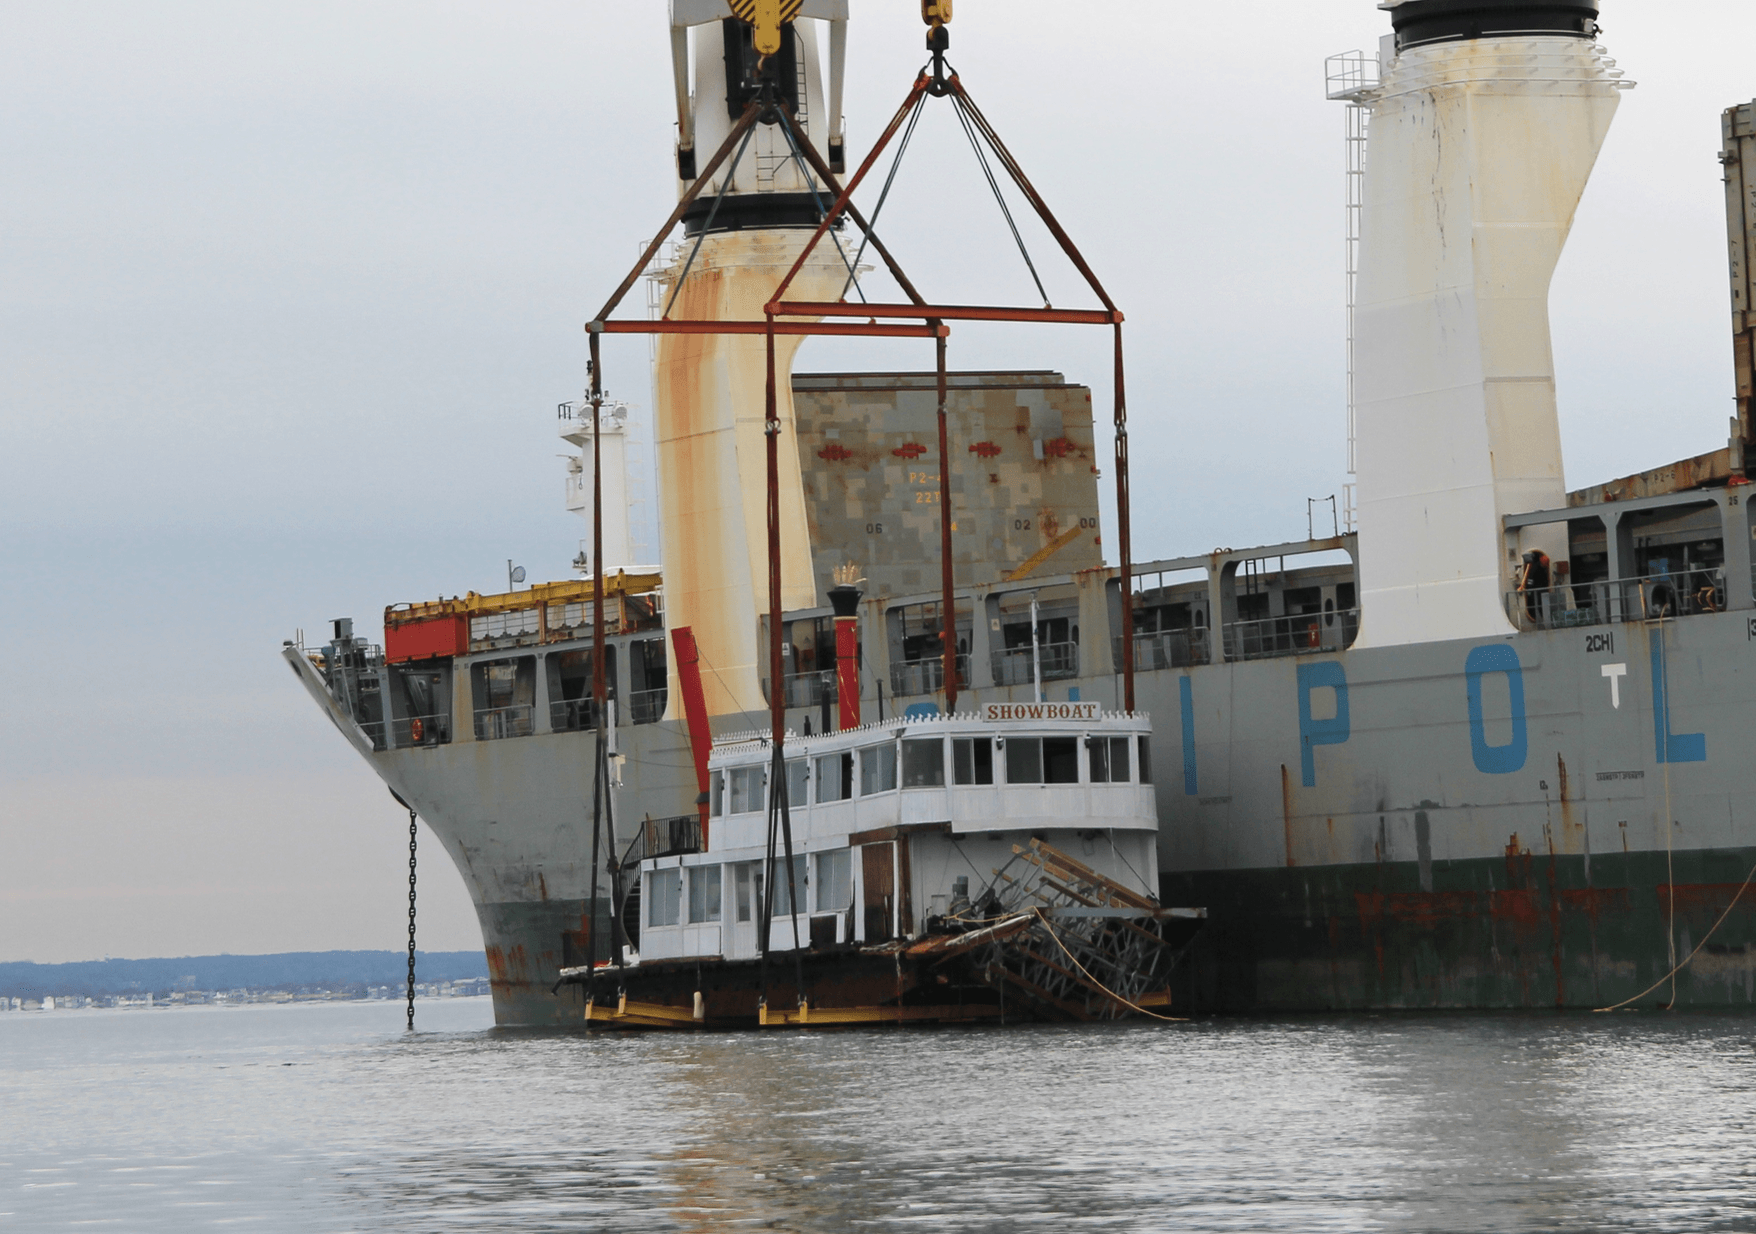 Showboat photographed Nov 30 as crane operators attempted unsuccessfully to lift the former amusement park ride onto a jumbo cargo ship. Photo: Leslie Yager